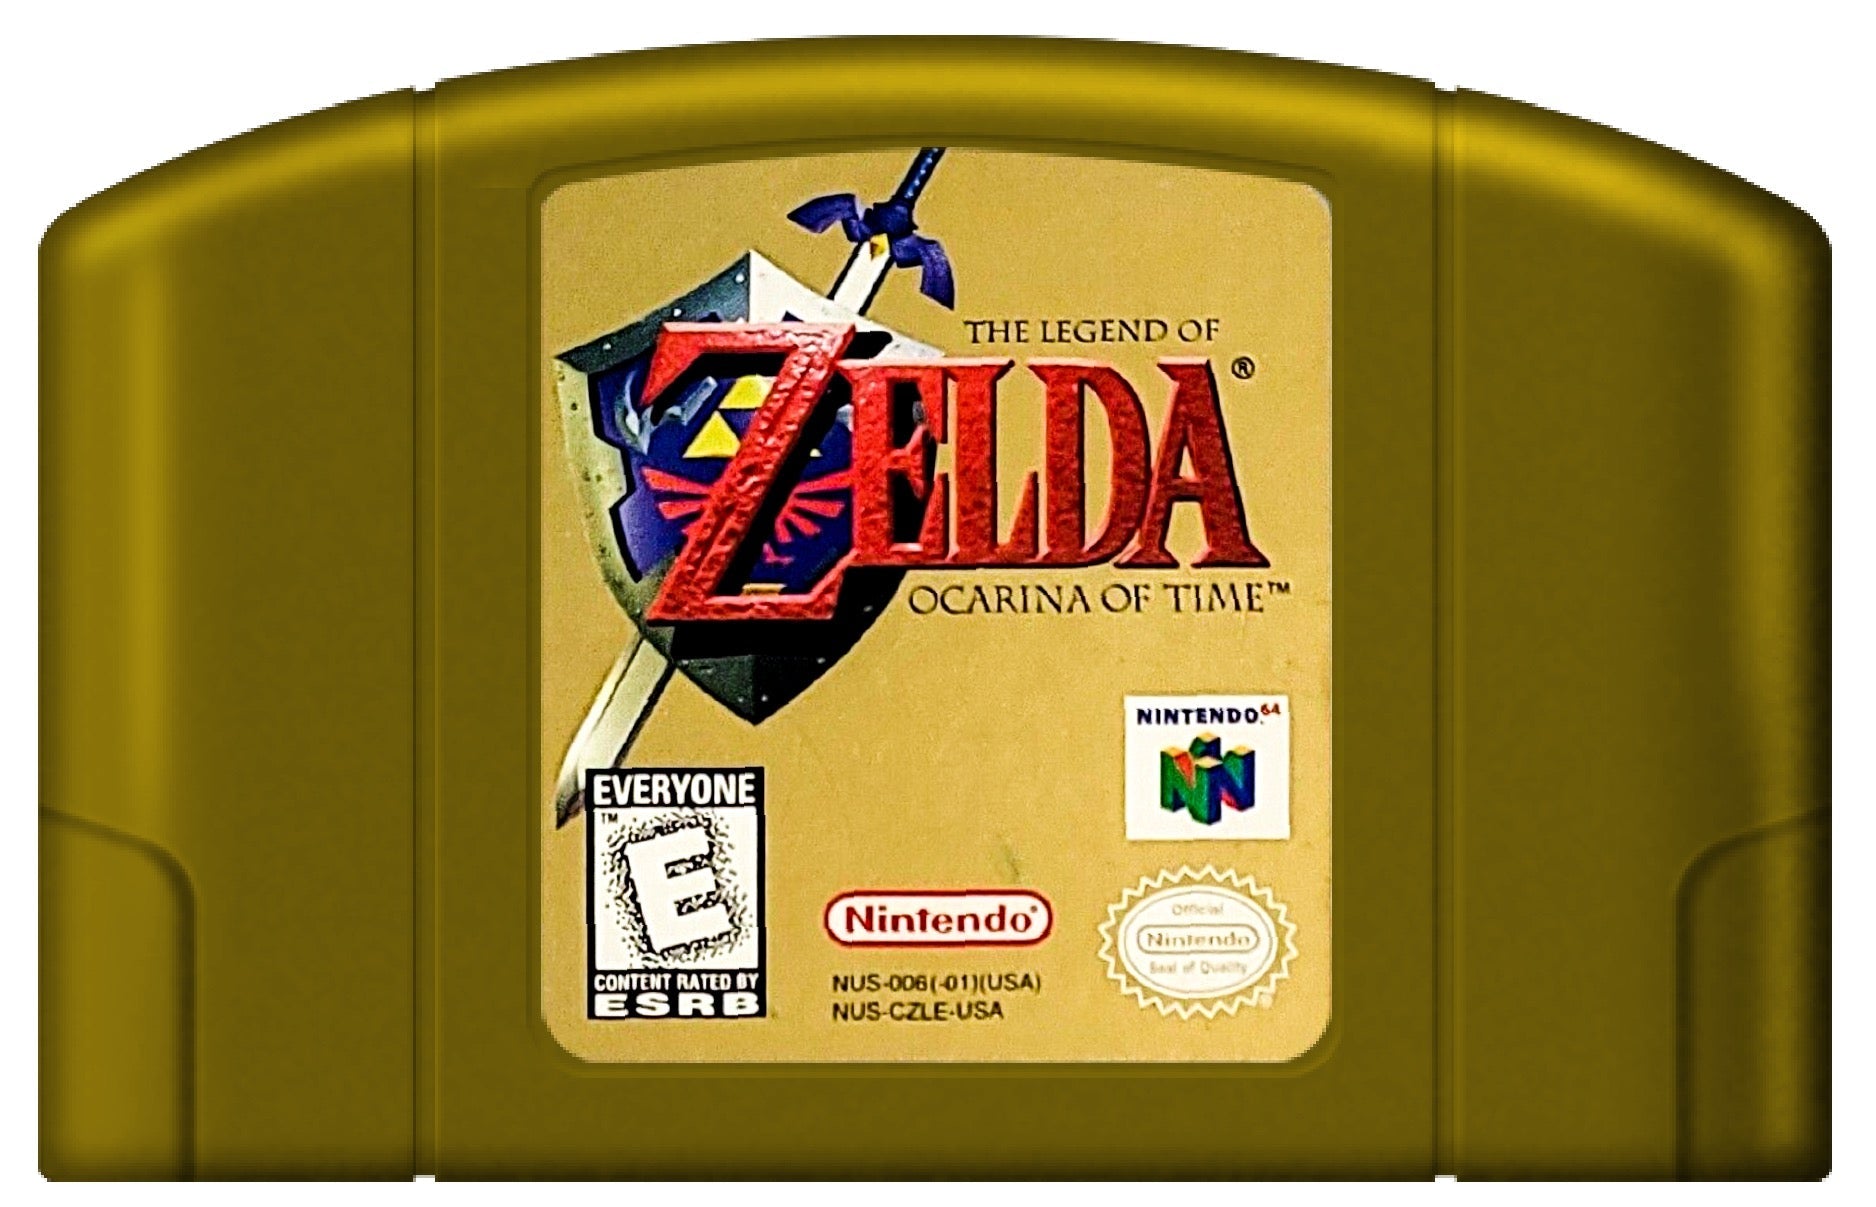 The Legend of Zelda: Ocarina of Time Collector's Edition